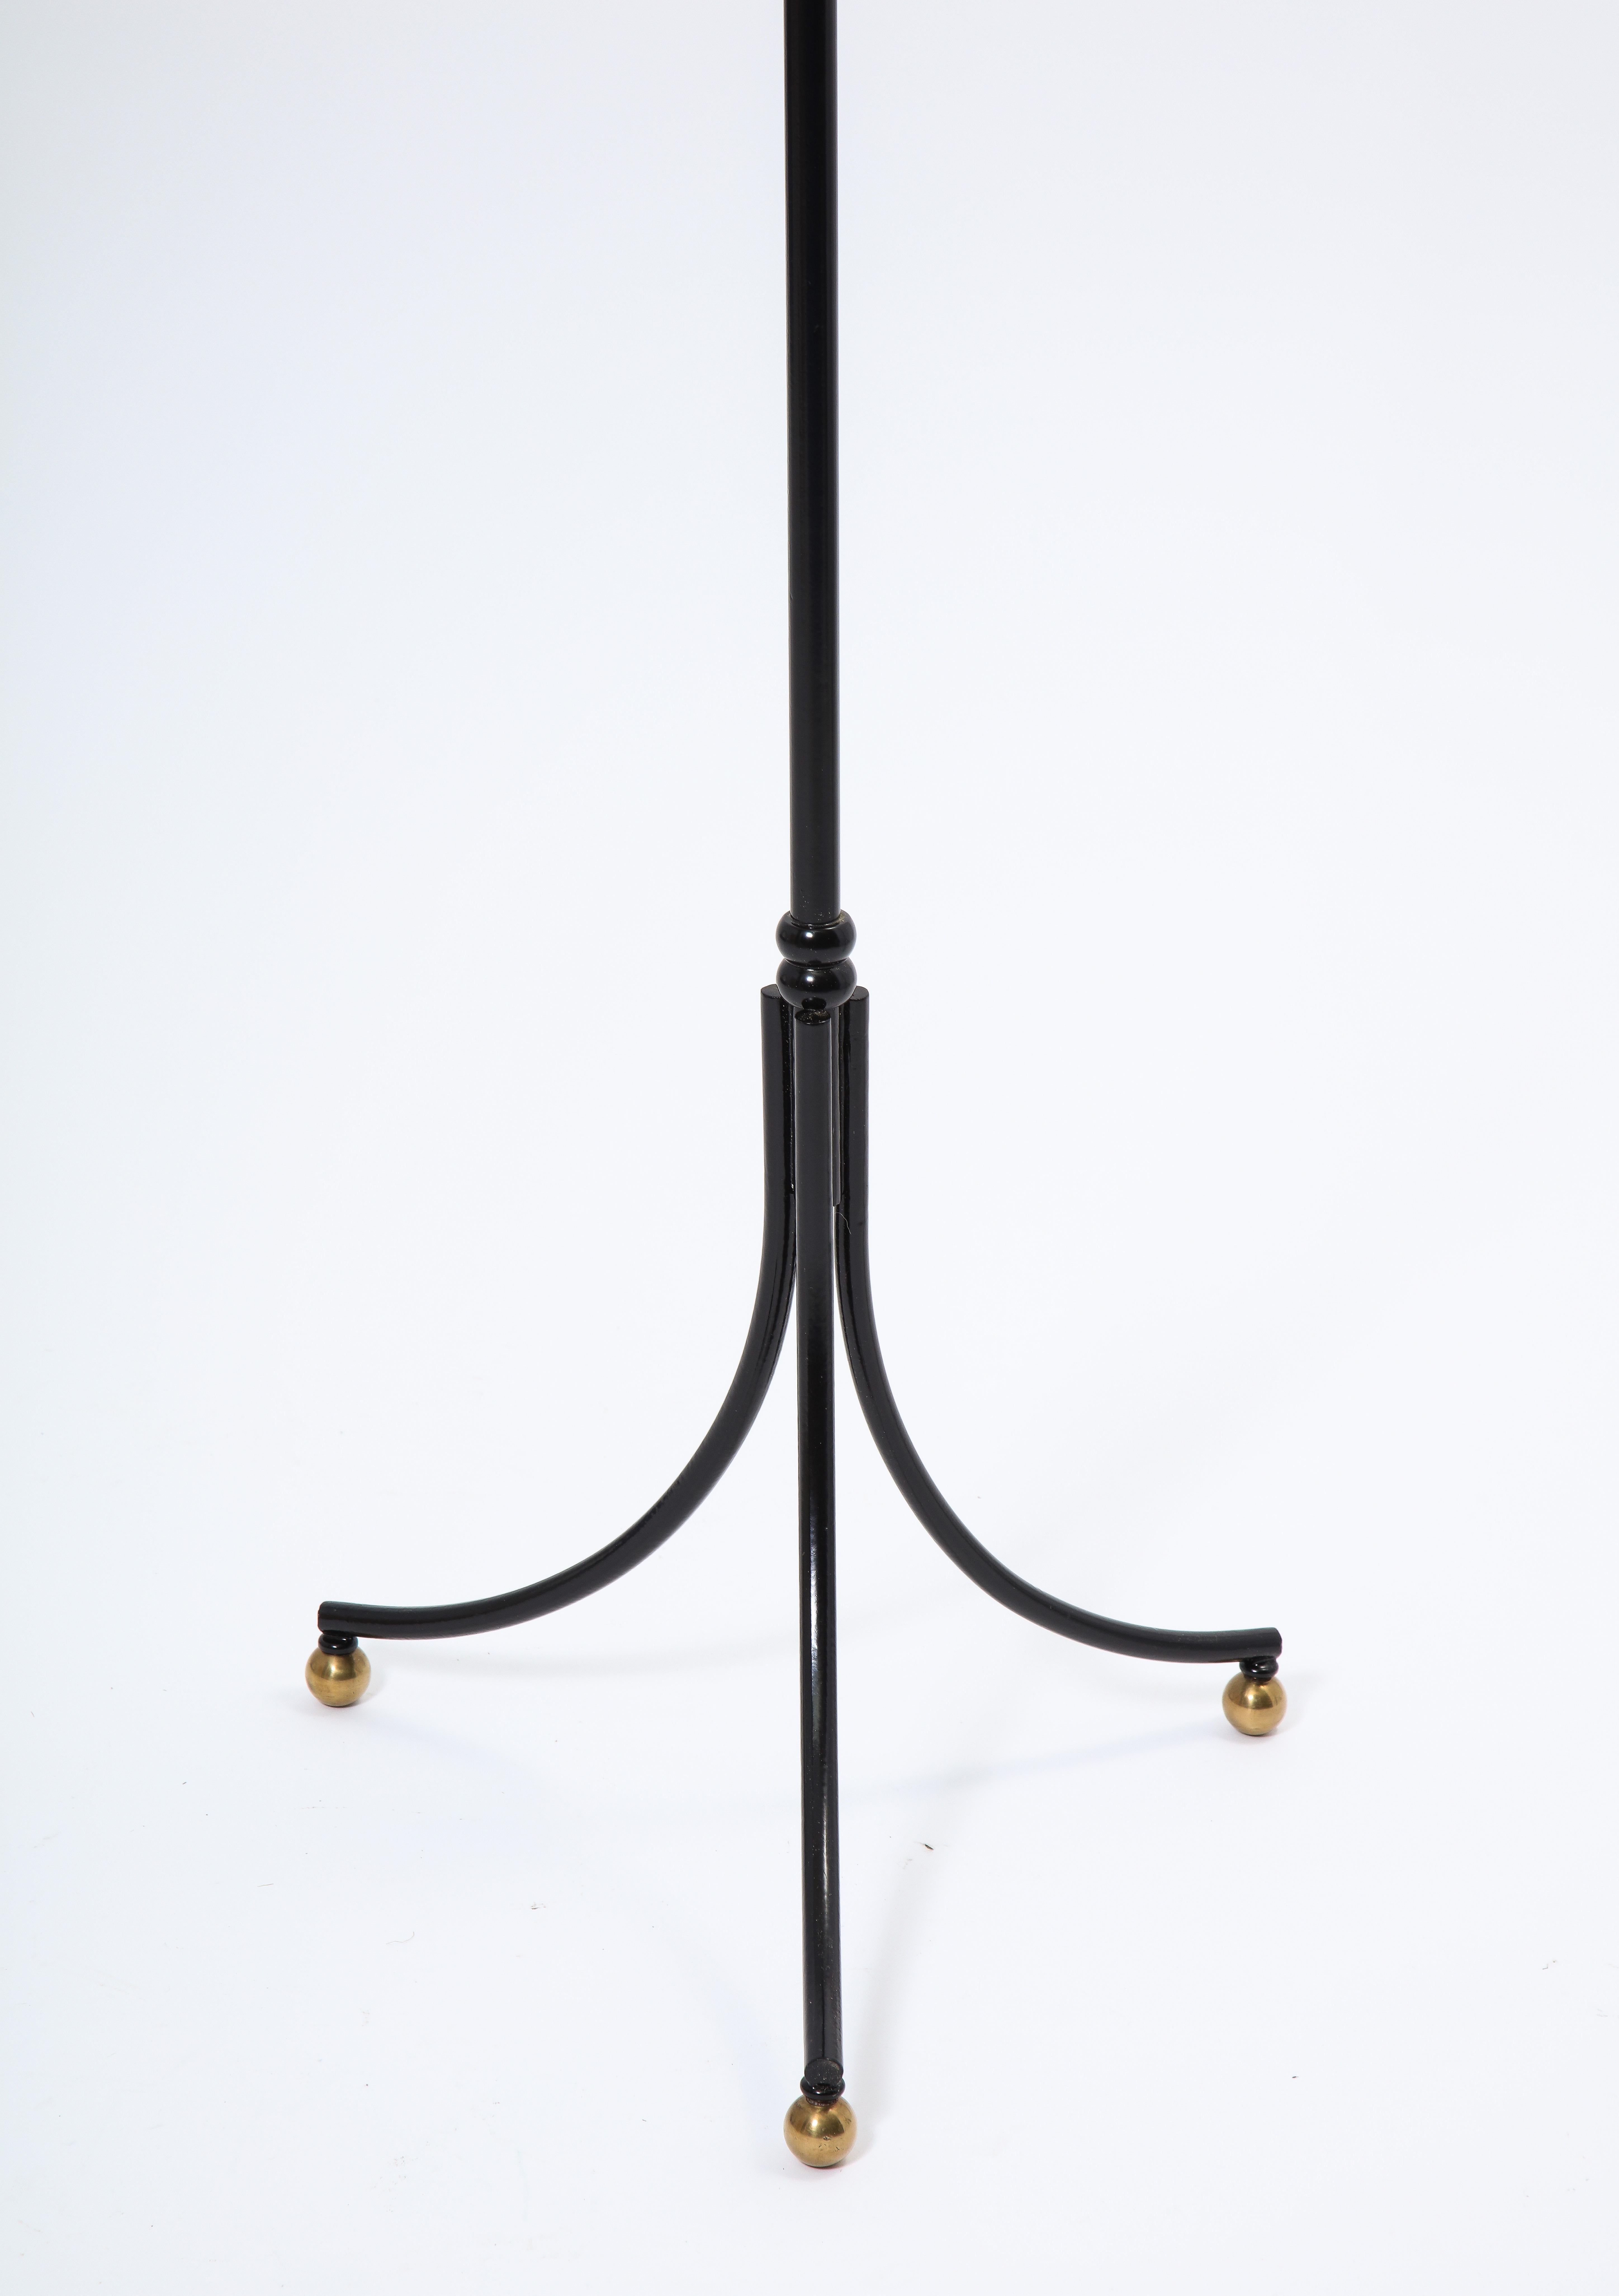 Elegant black enameled wrought iron and brass floor lamp, adjustable height.

Great details. Excellent reading light solution.

Rewired. Shade not included.